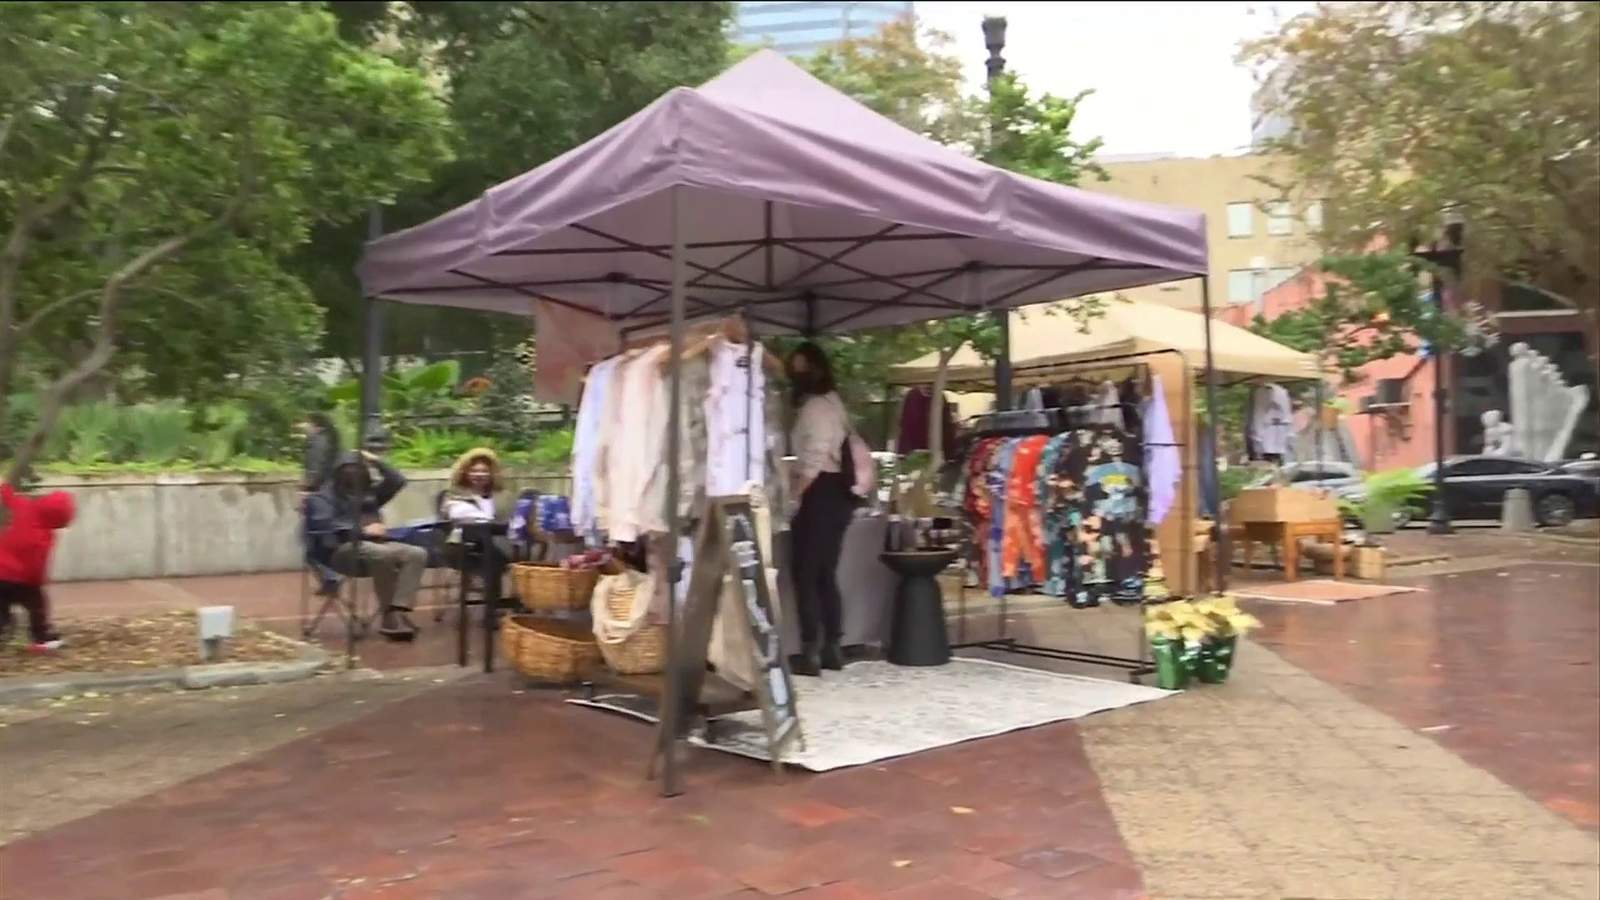 Holiday pop-up supports Jacksonville businesses impacted by pandemic